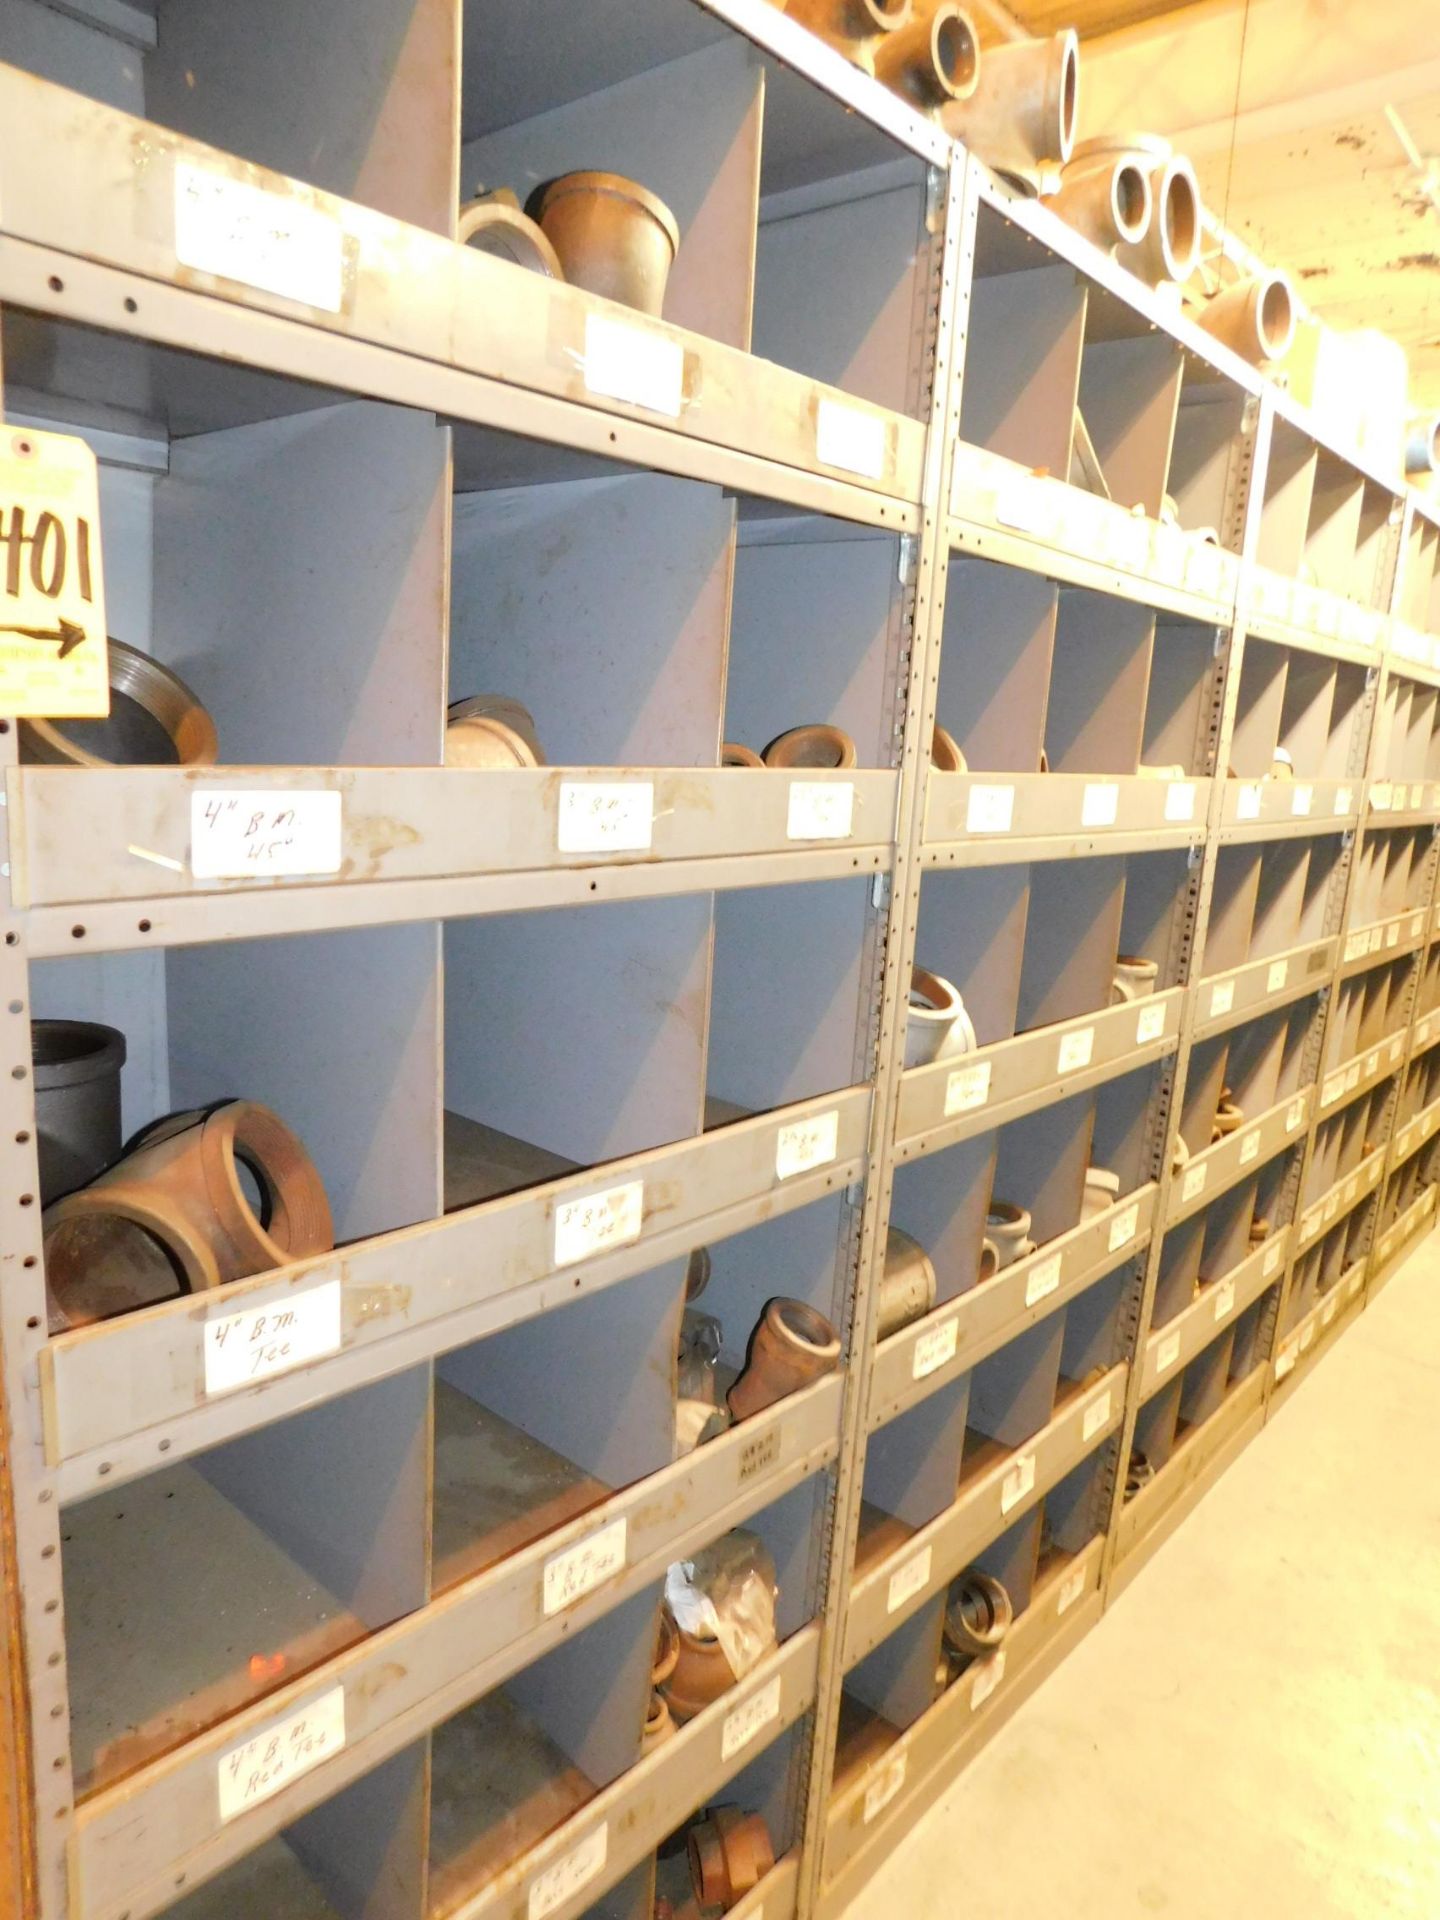 Contents of (4) Sections of Metal Shelving